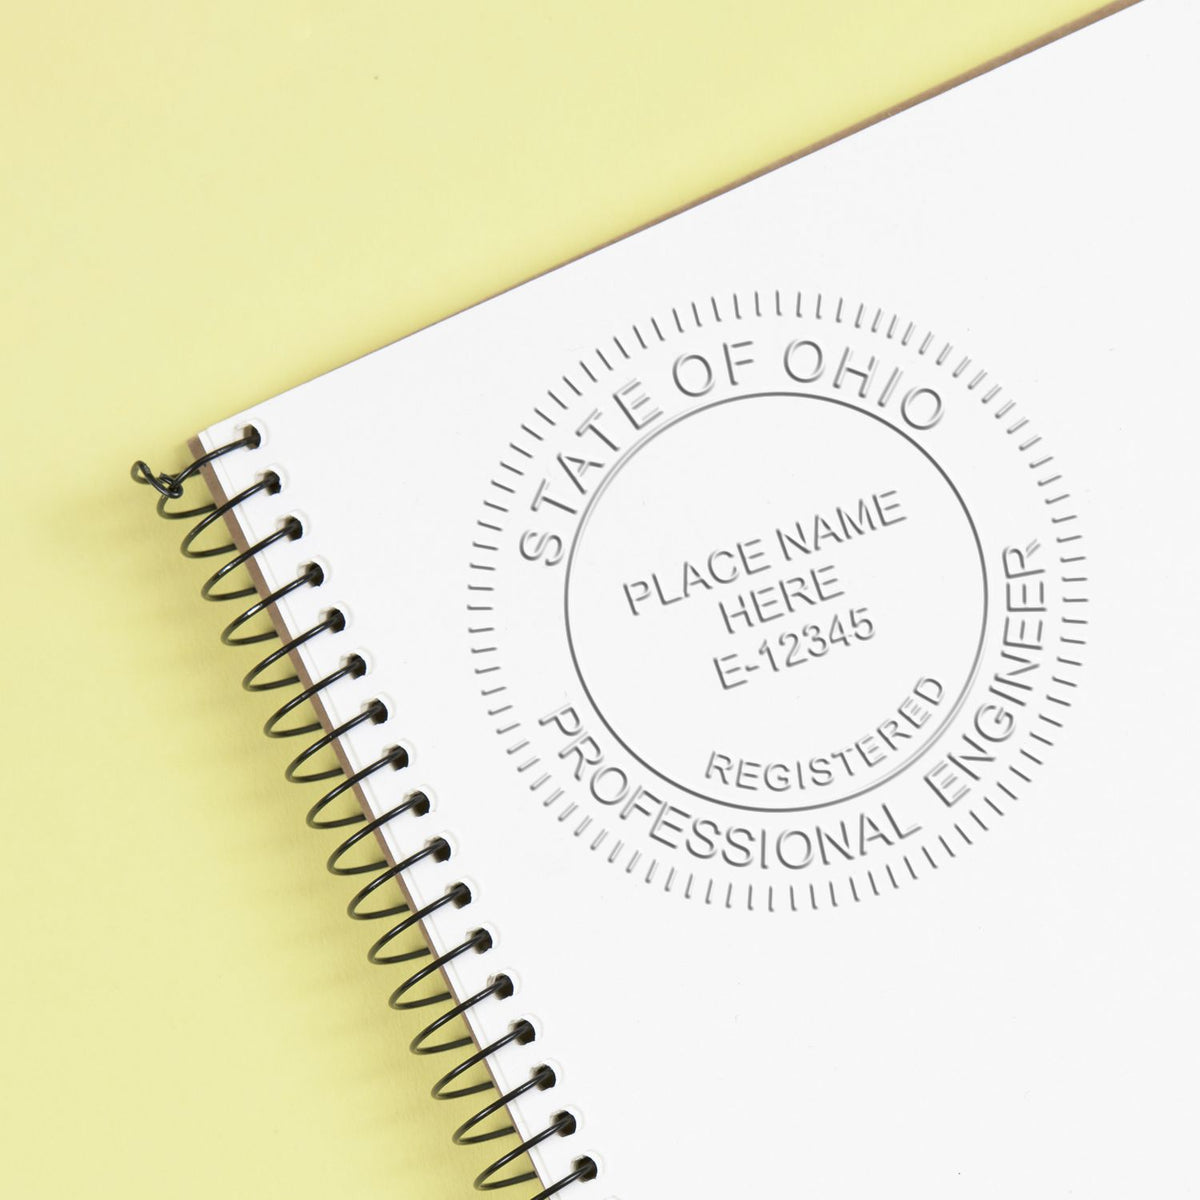 A stamped impression of the Soft Ohio Professional Engineer Seal in this stylish lifestyle photo, setting the tone for a unique and personalized product.